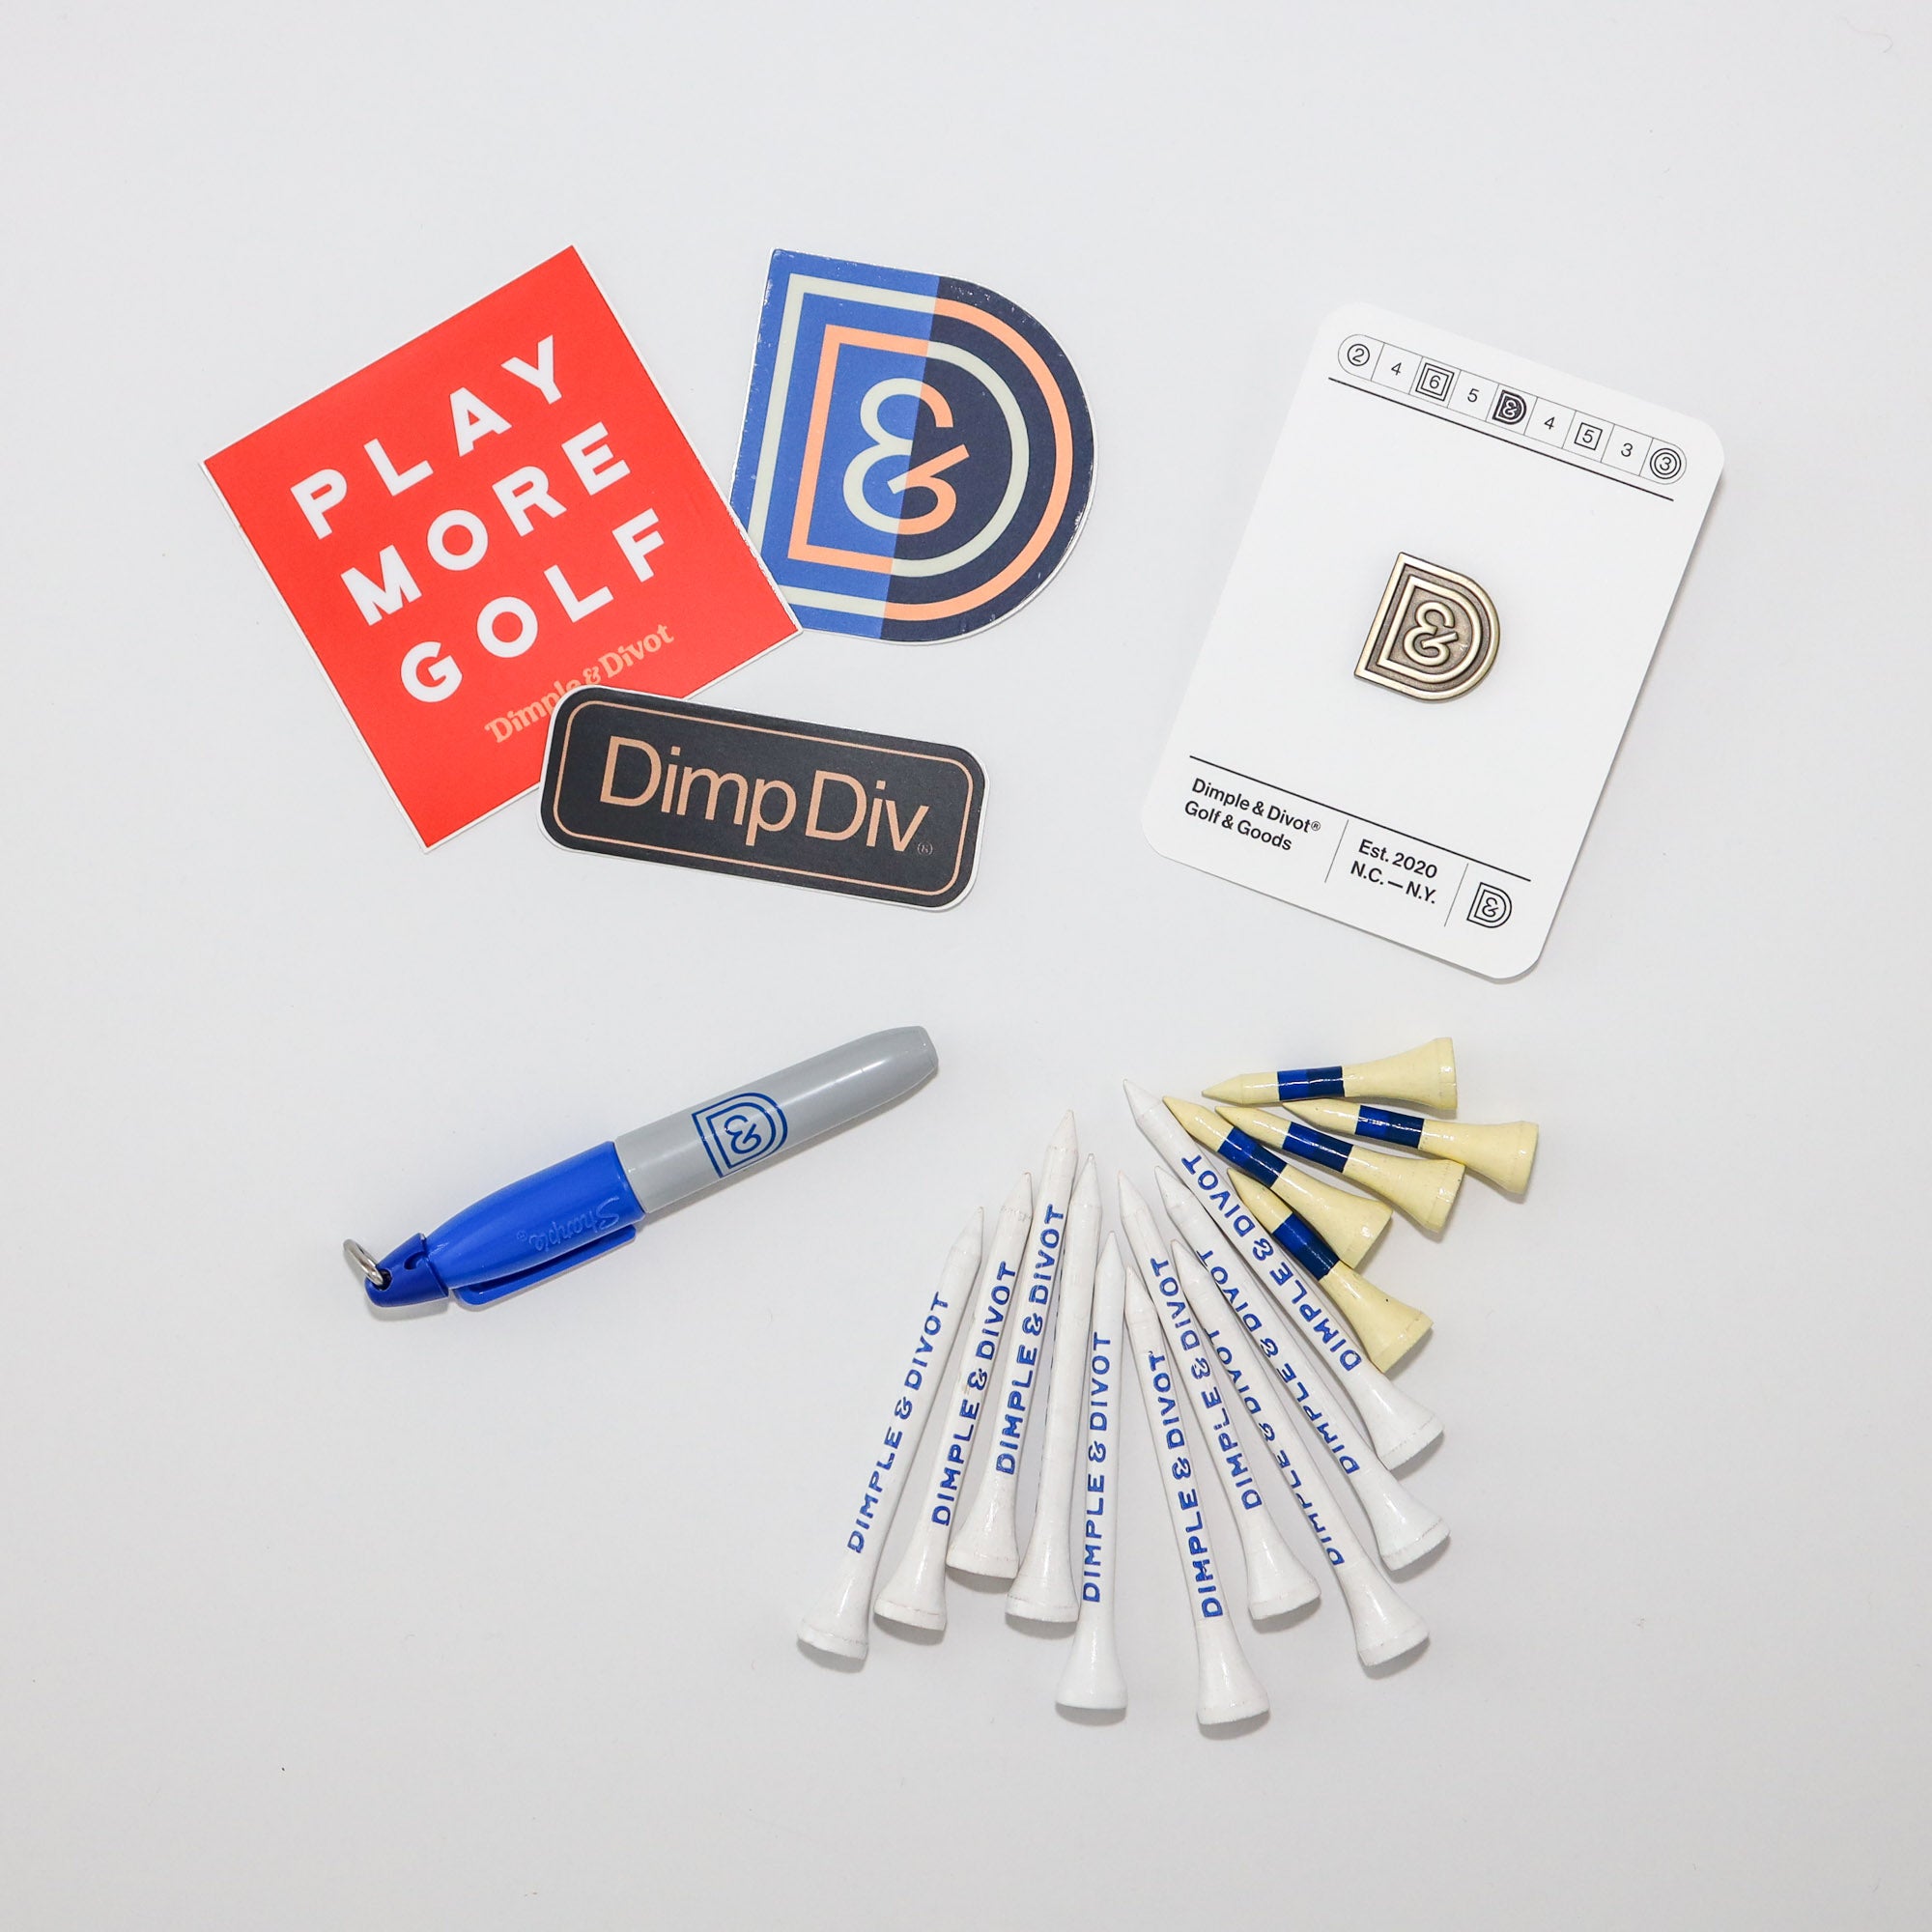 Dimplehead Kit - Stickers, Tees, Marker & Pin